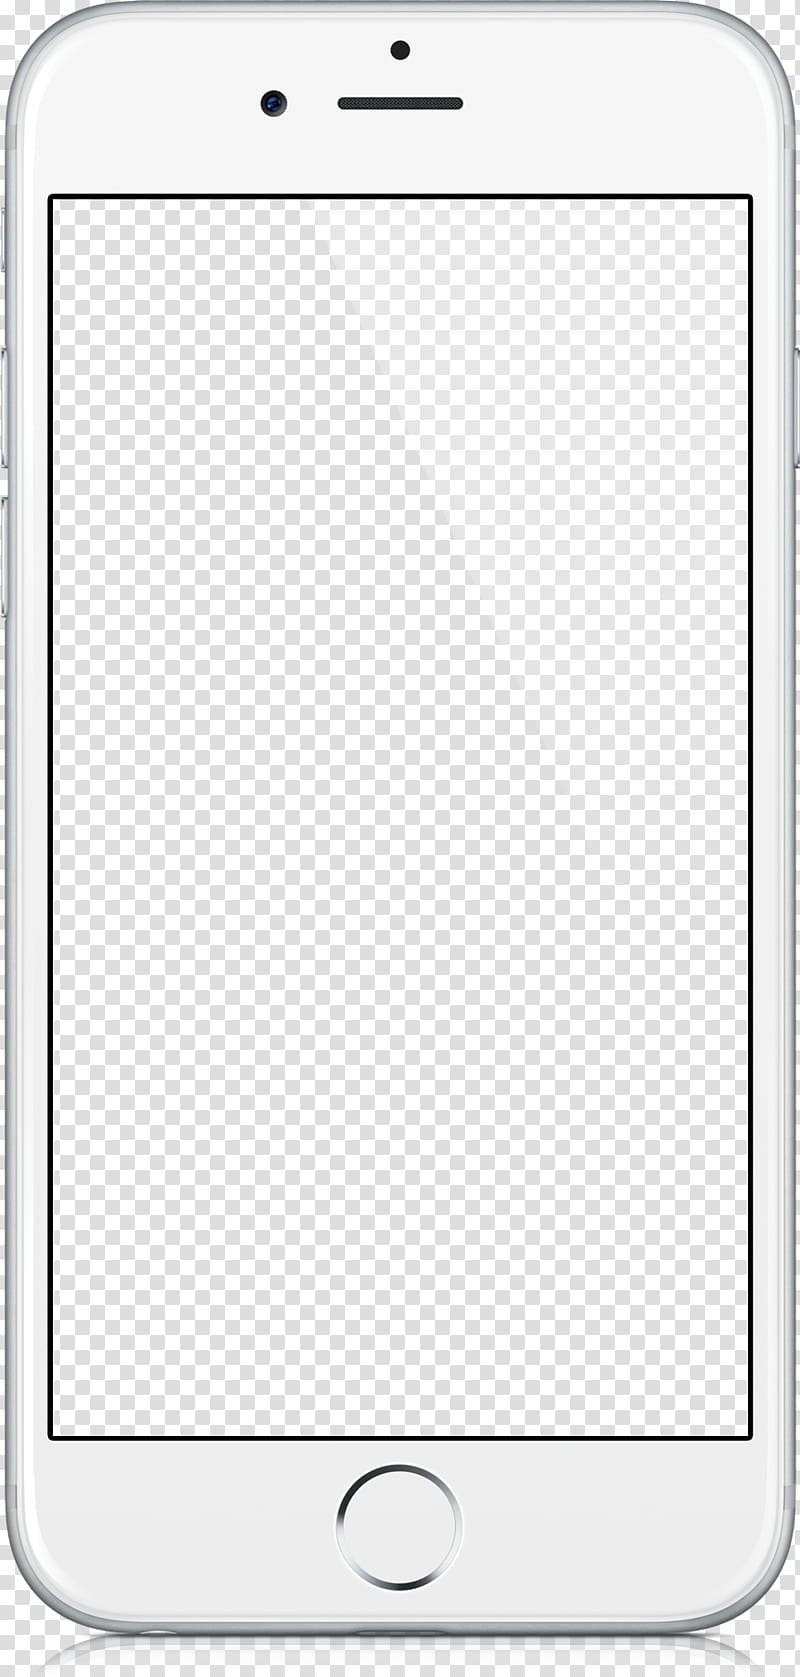 Ipad, IPhone 6s Plus, Iphone 7, Apple Ipad Family, IPhone 5S, Android, App Store, Mobile Phones transparent background PNG clipart